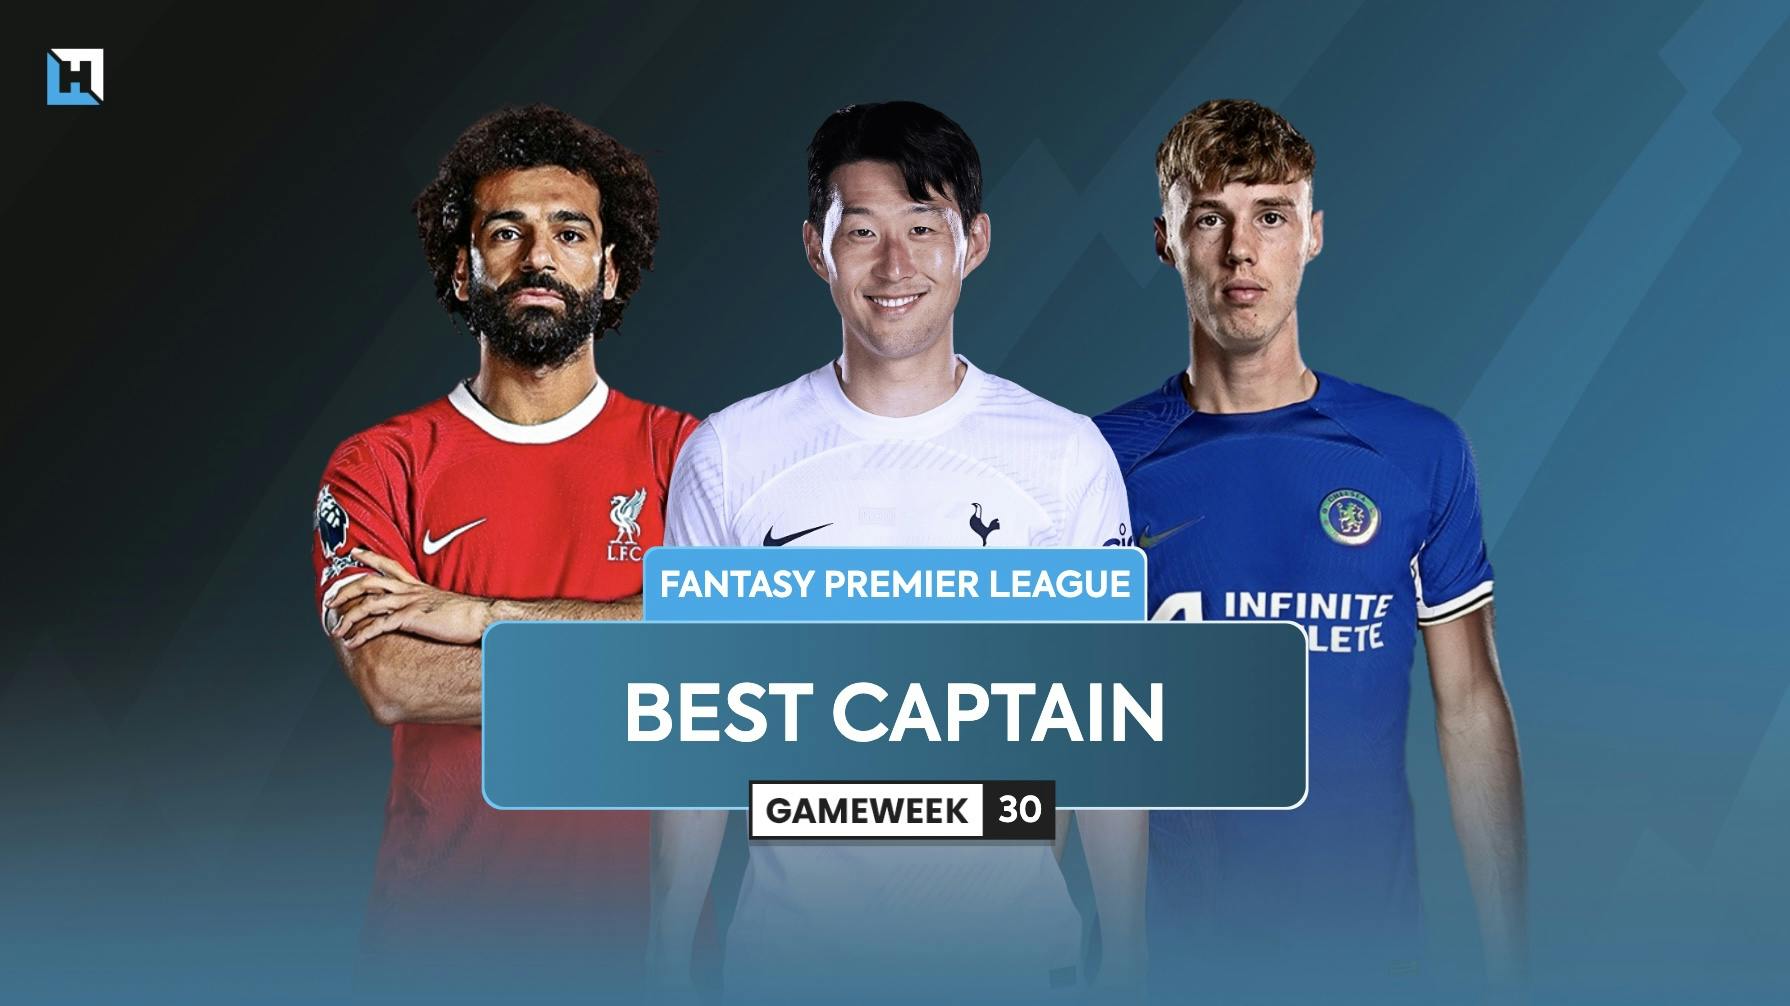 Who is the best FPL captain for Gameweek 30?